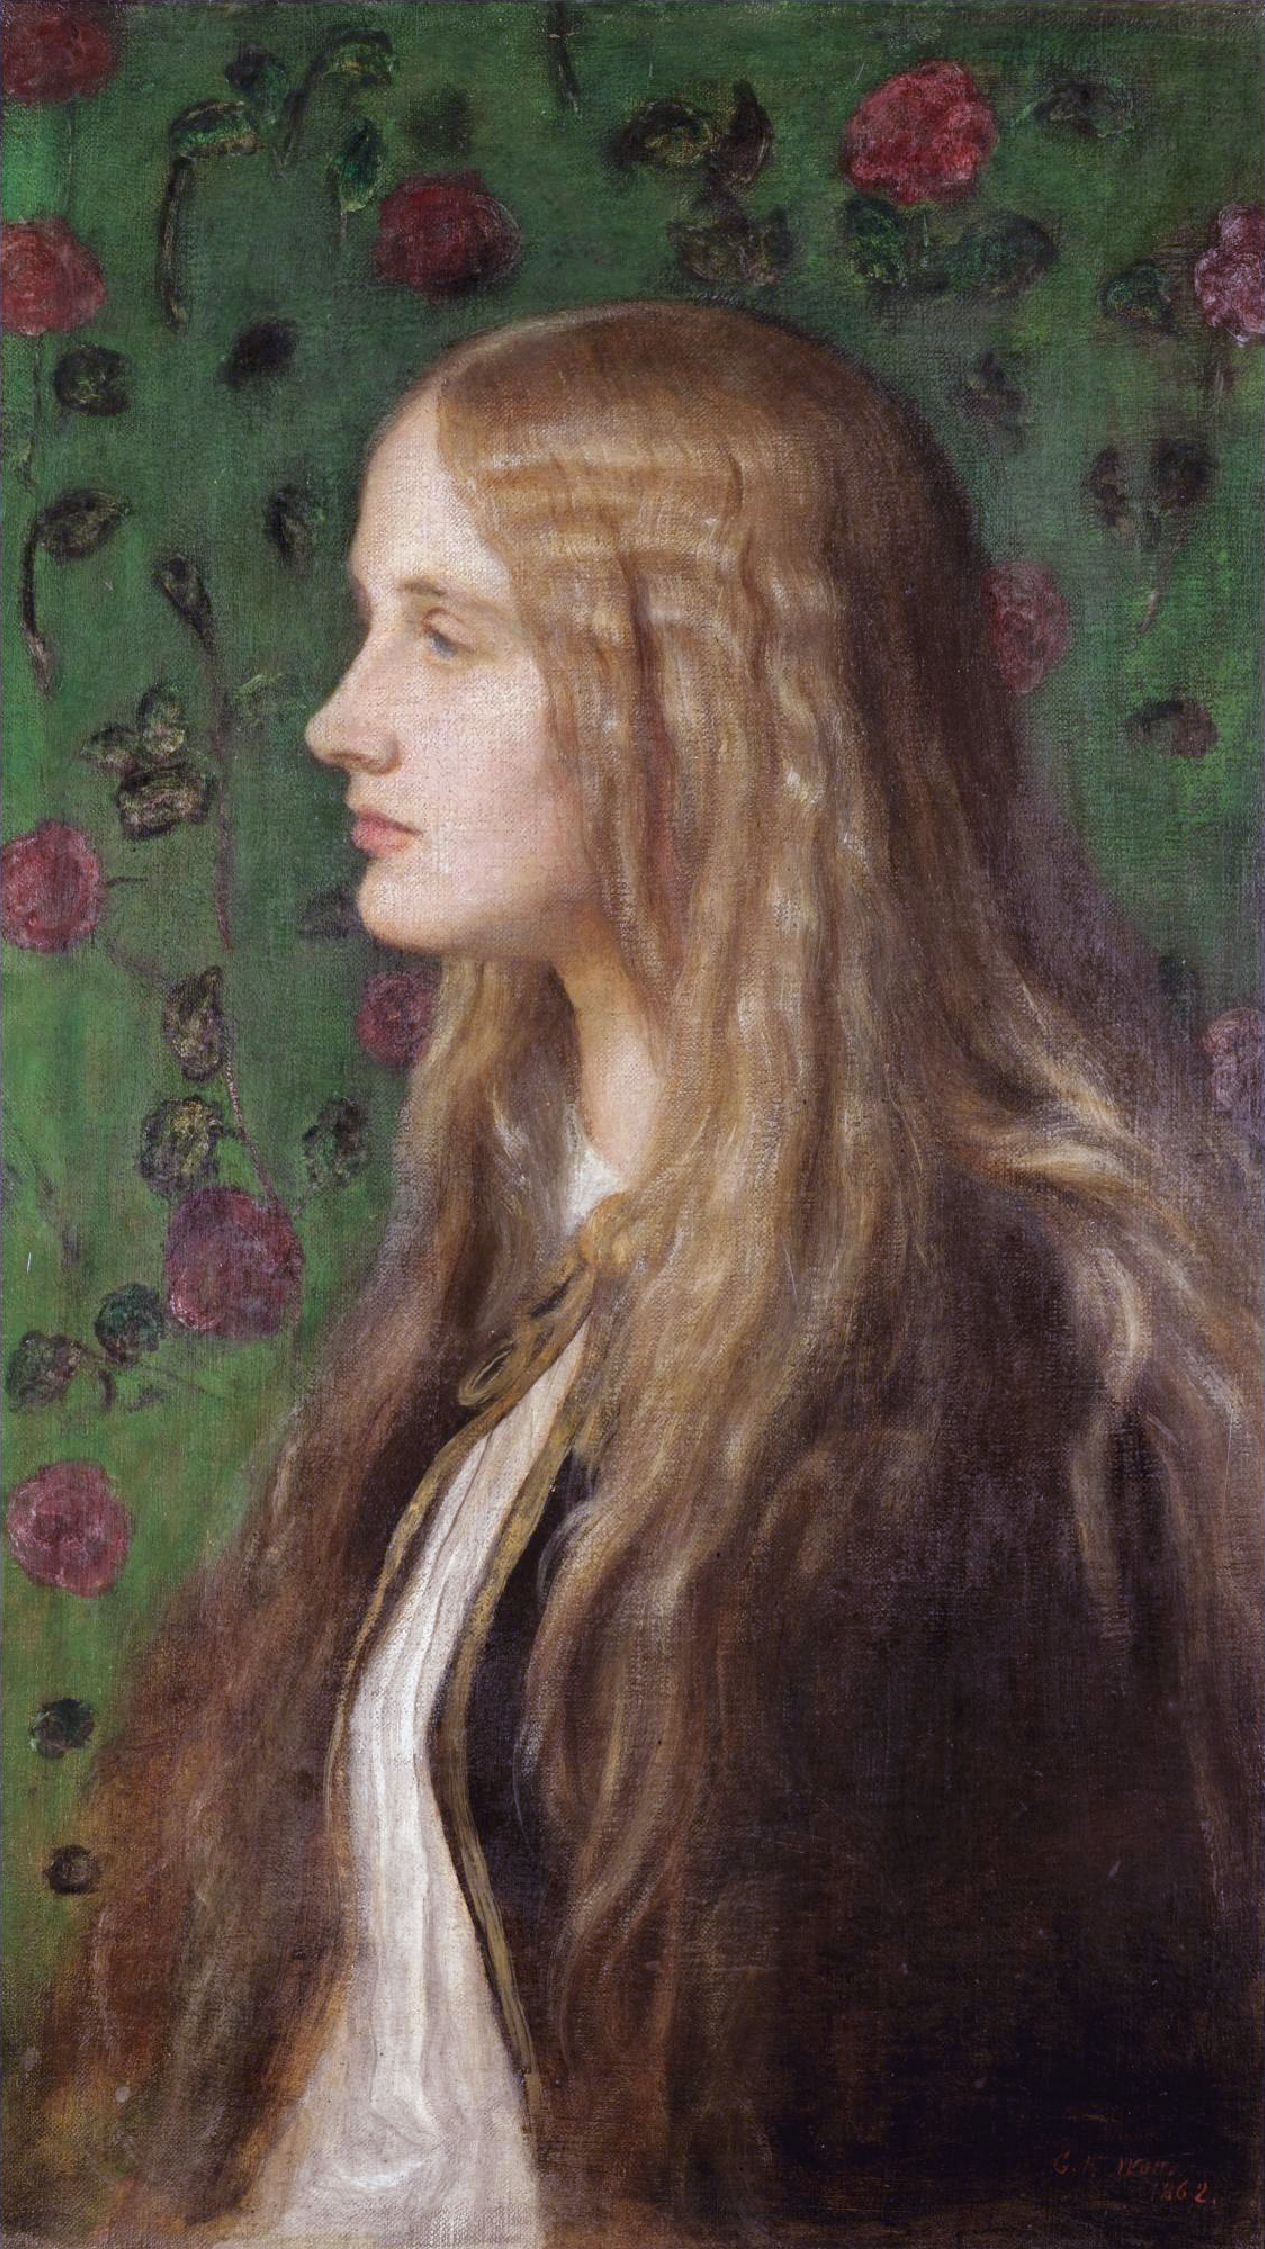 Inspiration: “Edith Villiers,” by George Frederic Watts